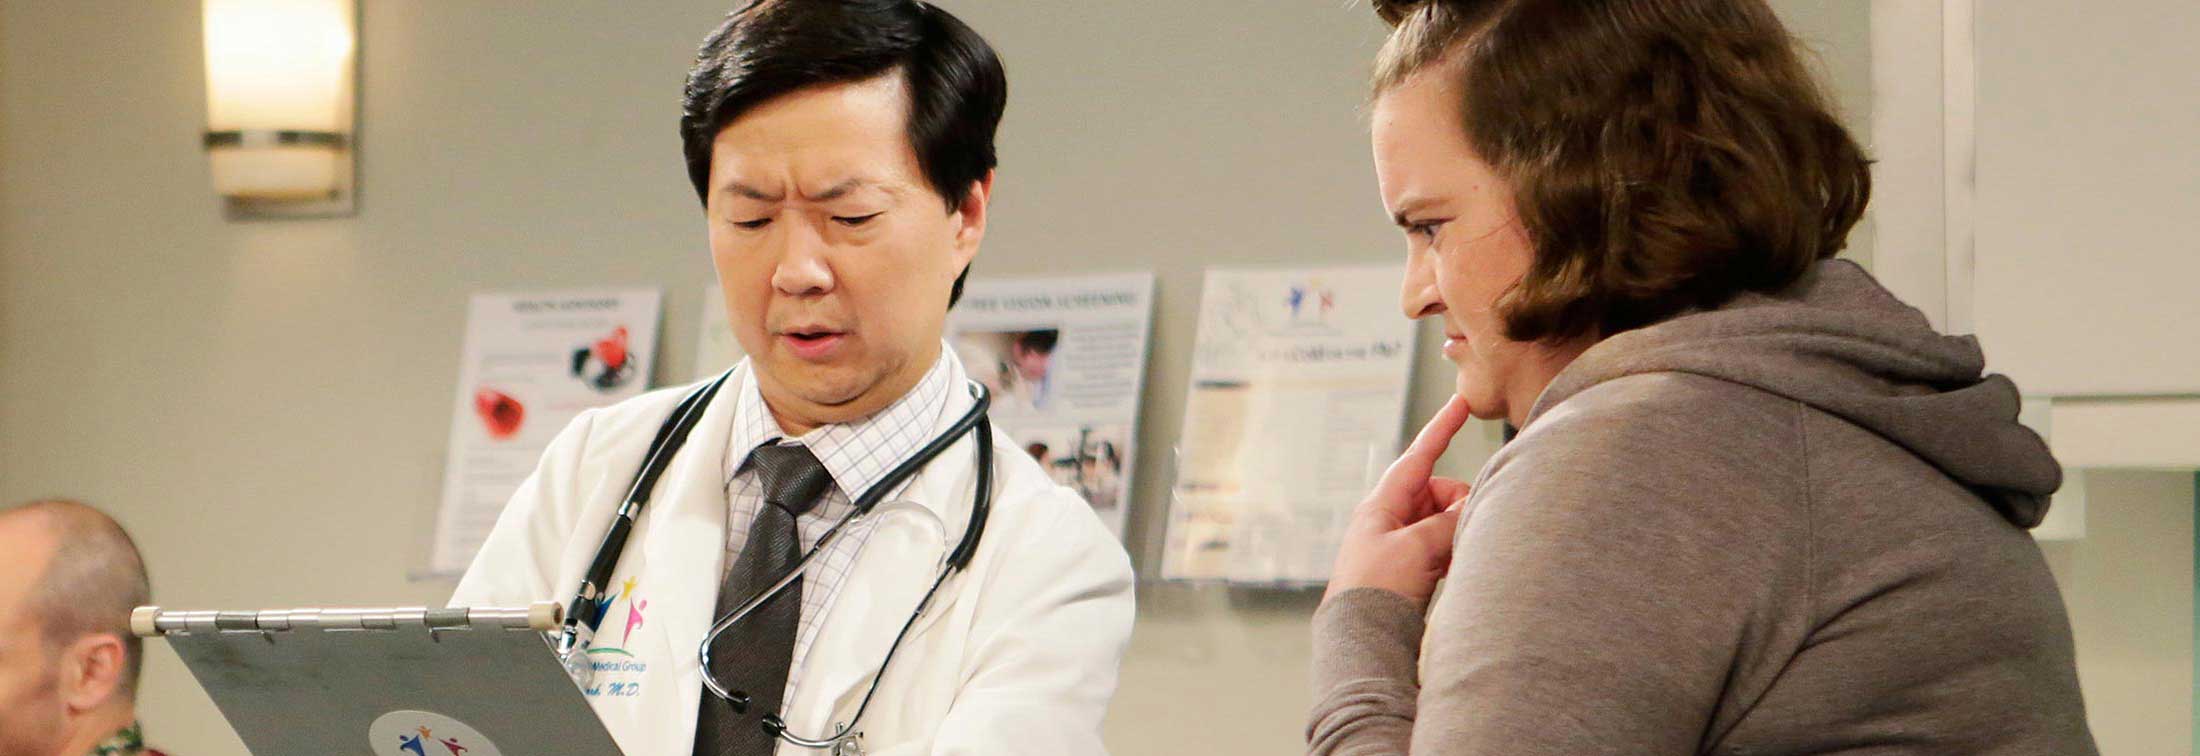 Dr Ken: The Complete Series - Ken Jeong's ready for a dose of comedy